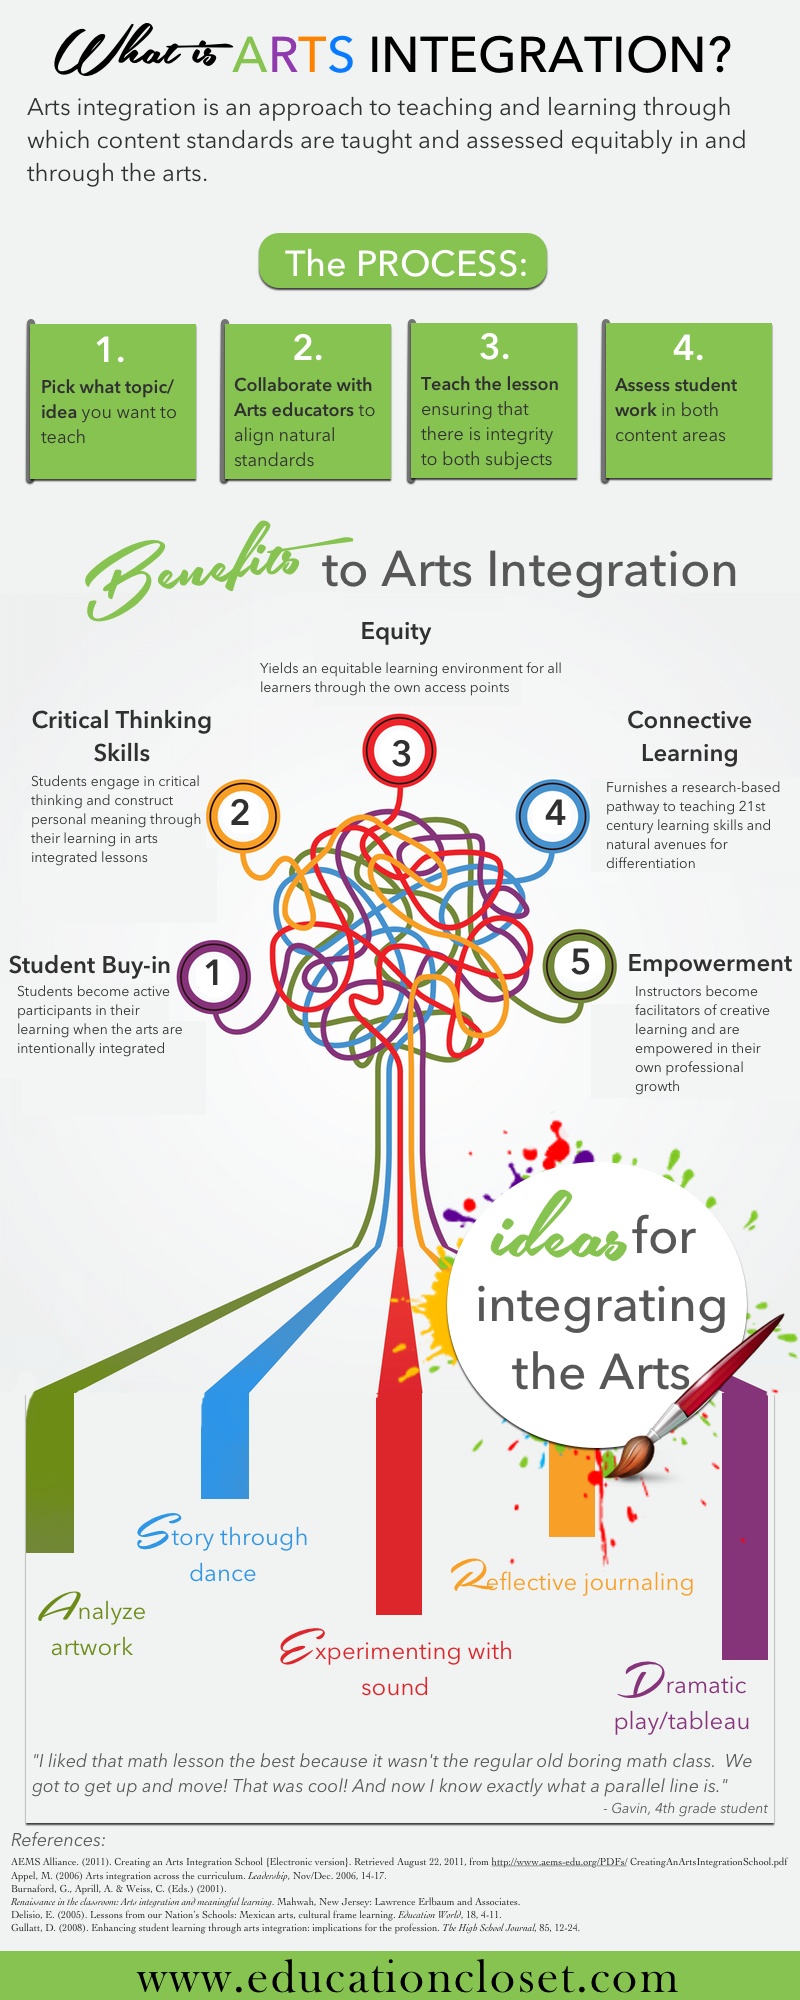 Arts Integration in Education Infographic